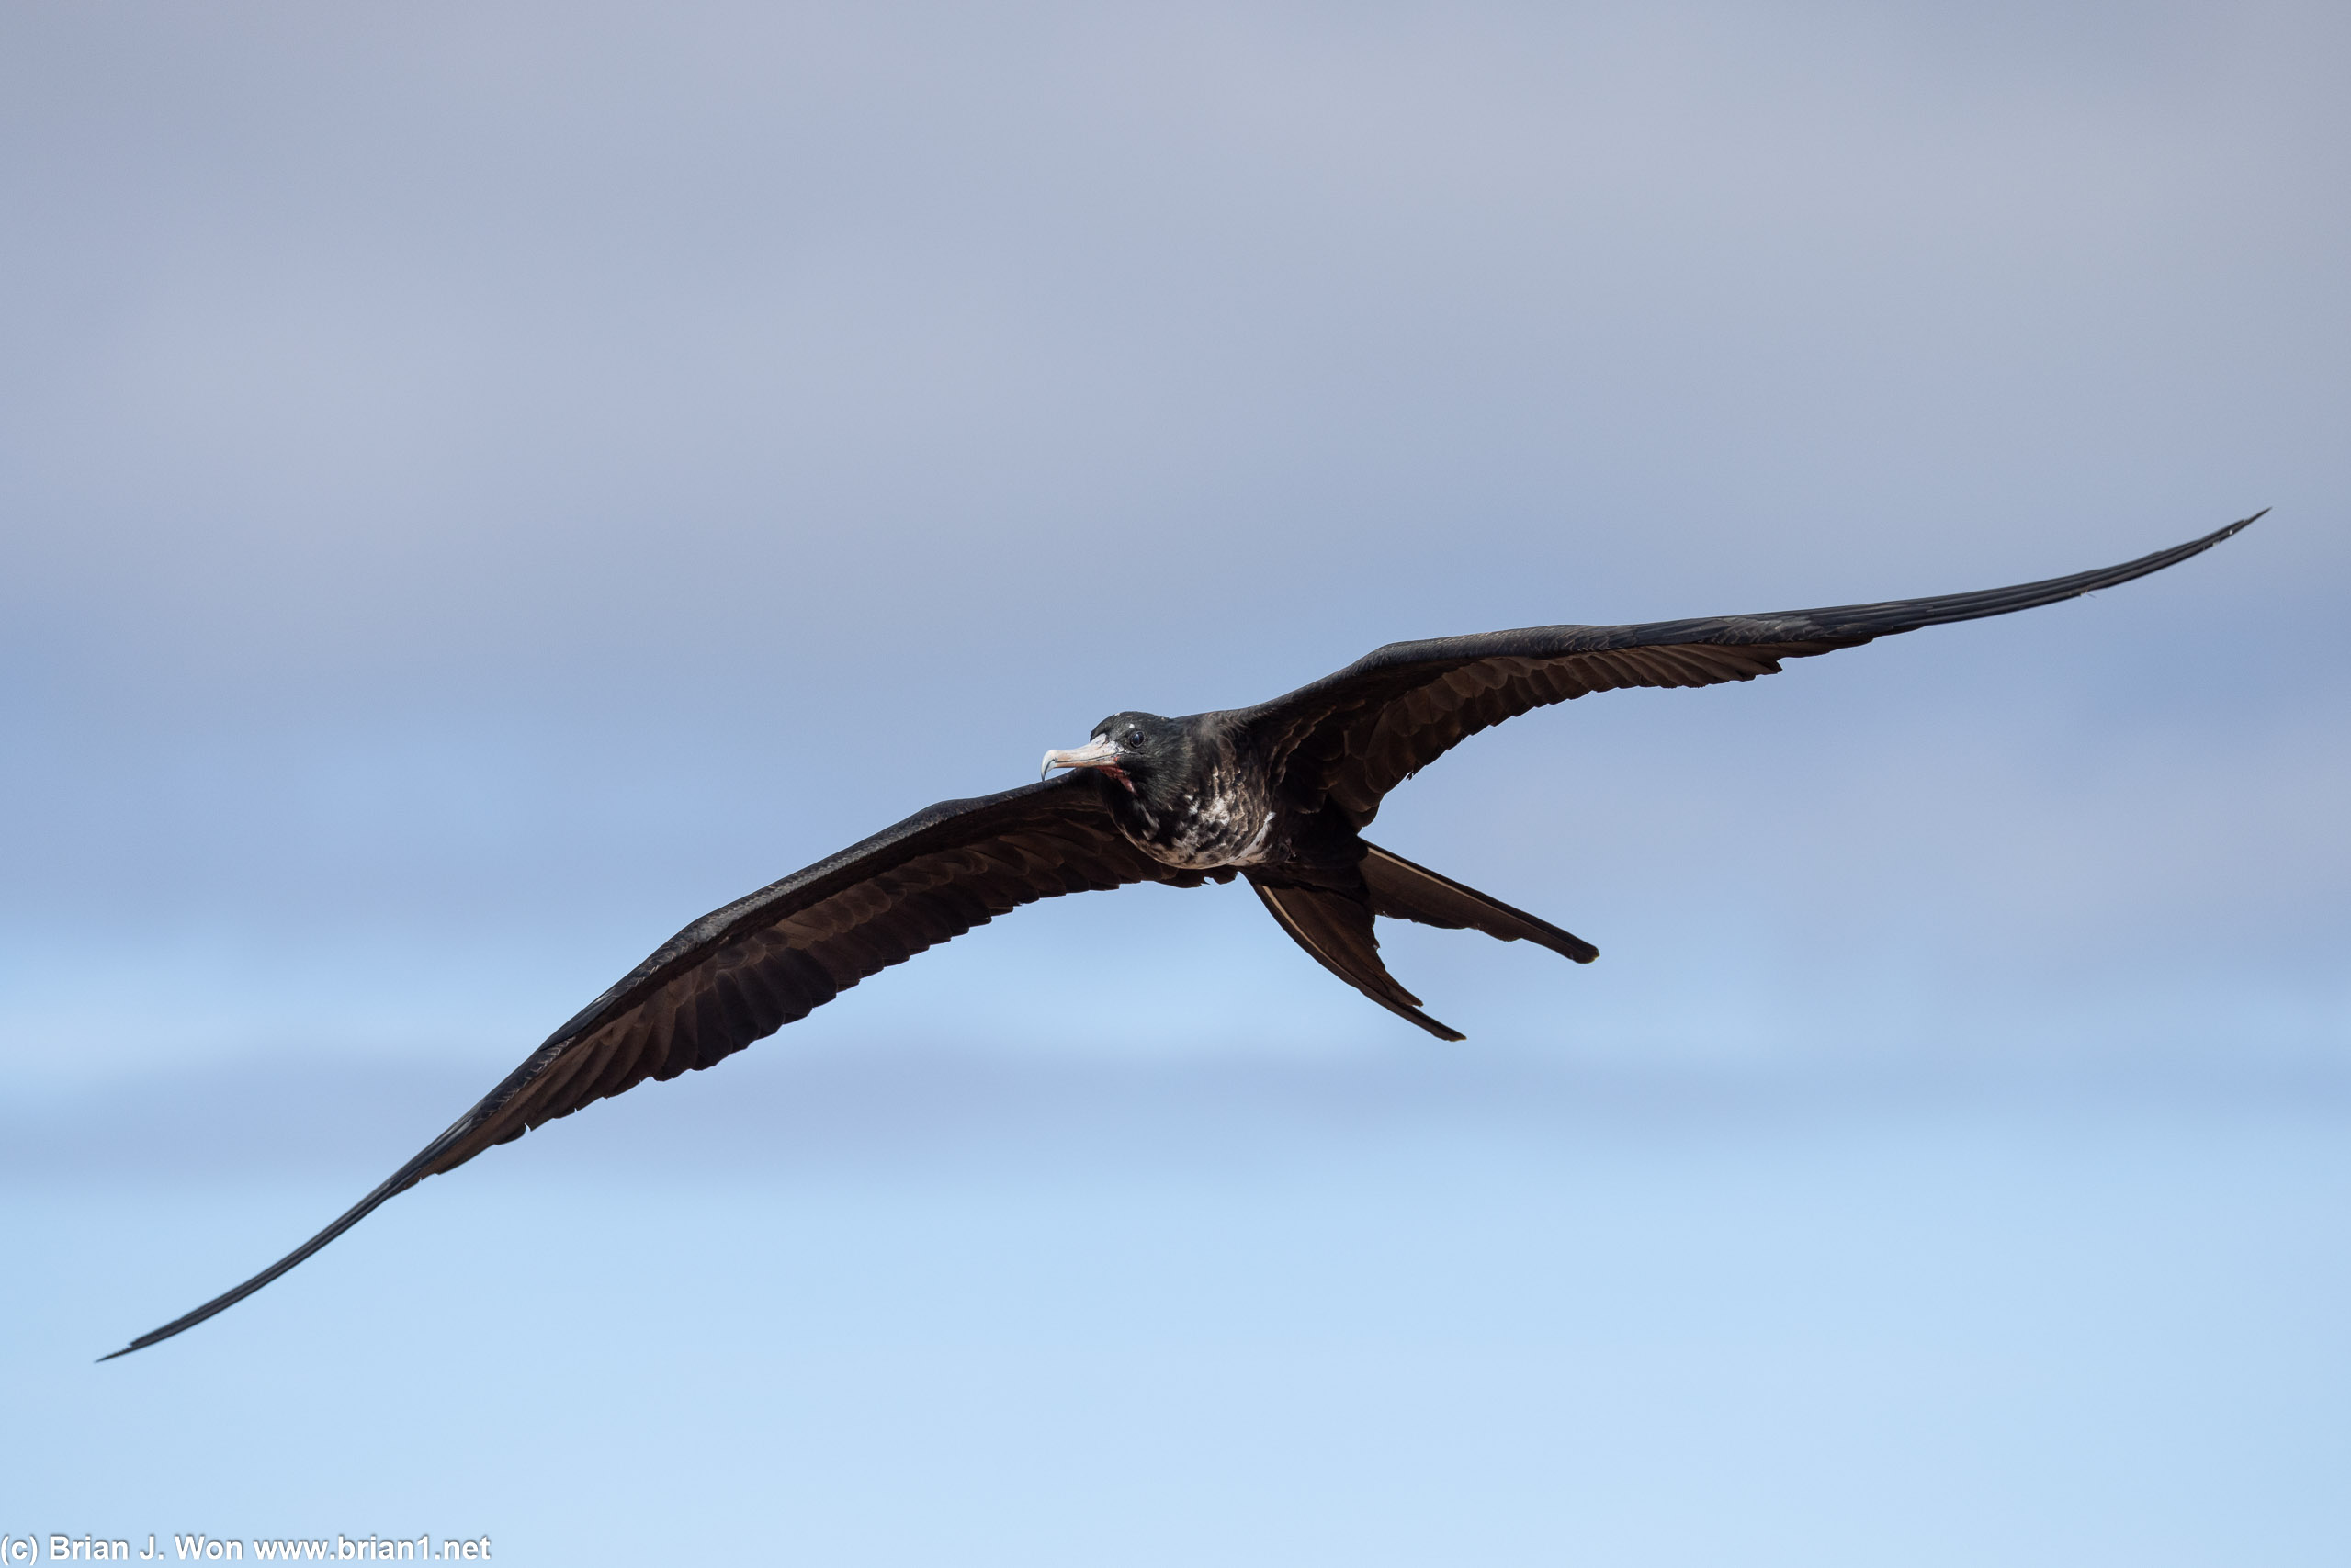 Guessing this is another frigatebird.